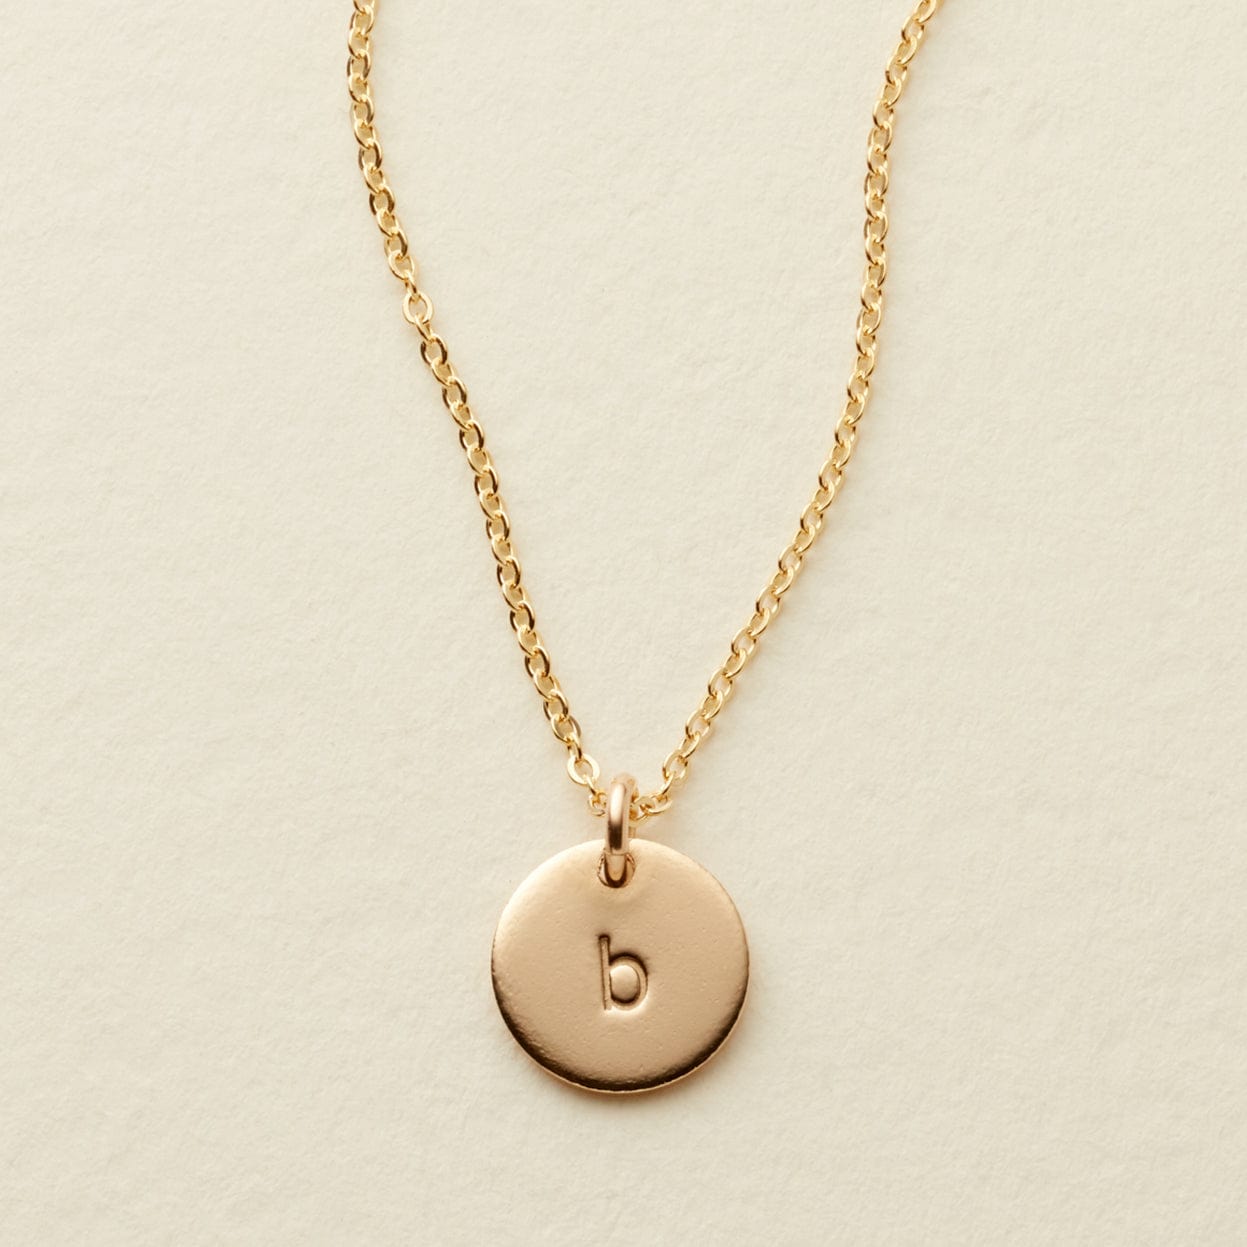 Initial Pendant, Large Disc Necklace, Personalized Jewelry, Monogram Initial  Charm, Celebrity Inspir on Luulla